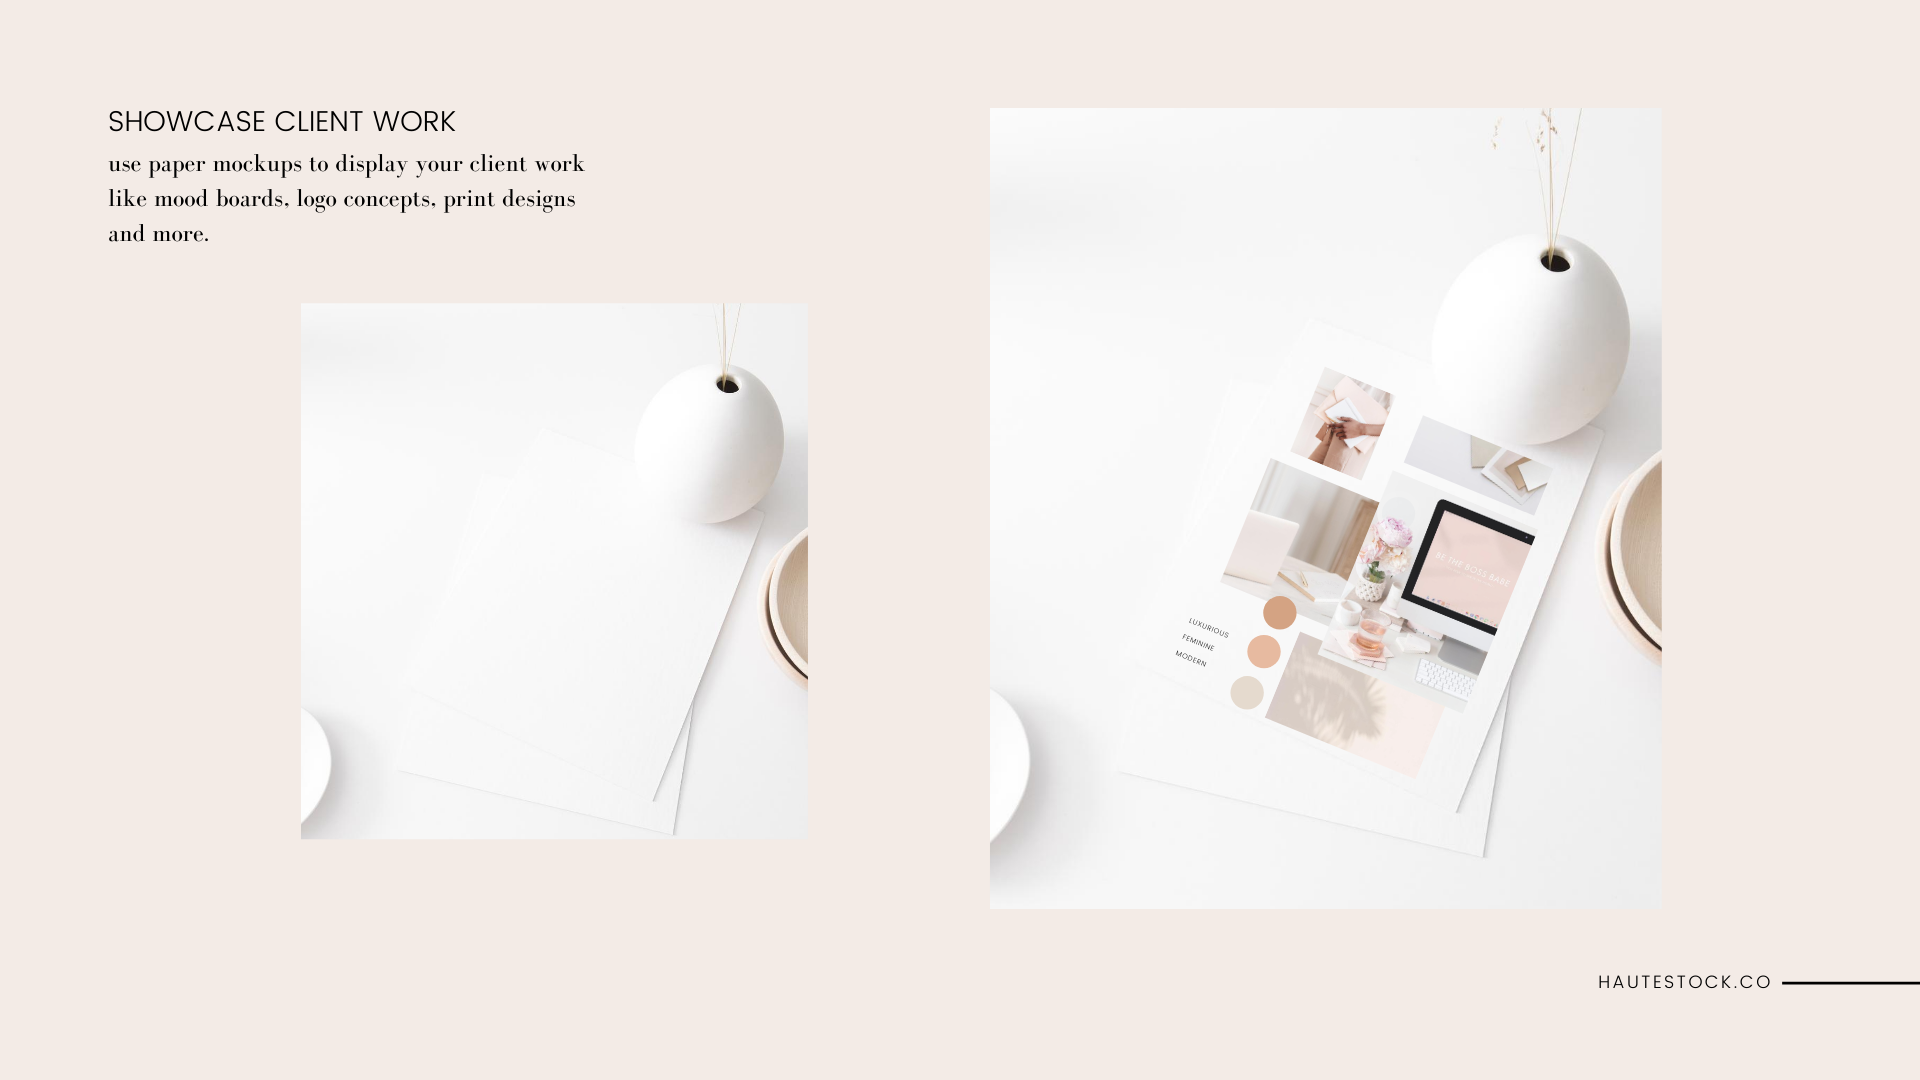 How to use paper stock photo mockups for portfolio or to showcase client work. Haute Stock styled stock image mockup with pink feminine brand board.